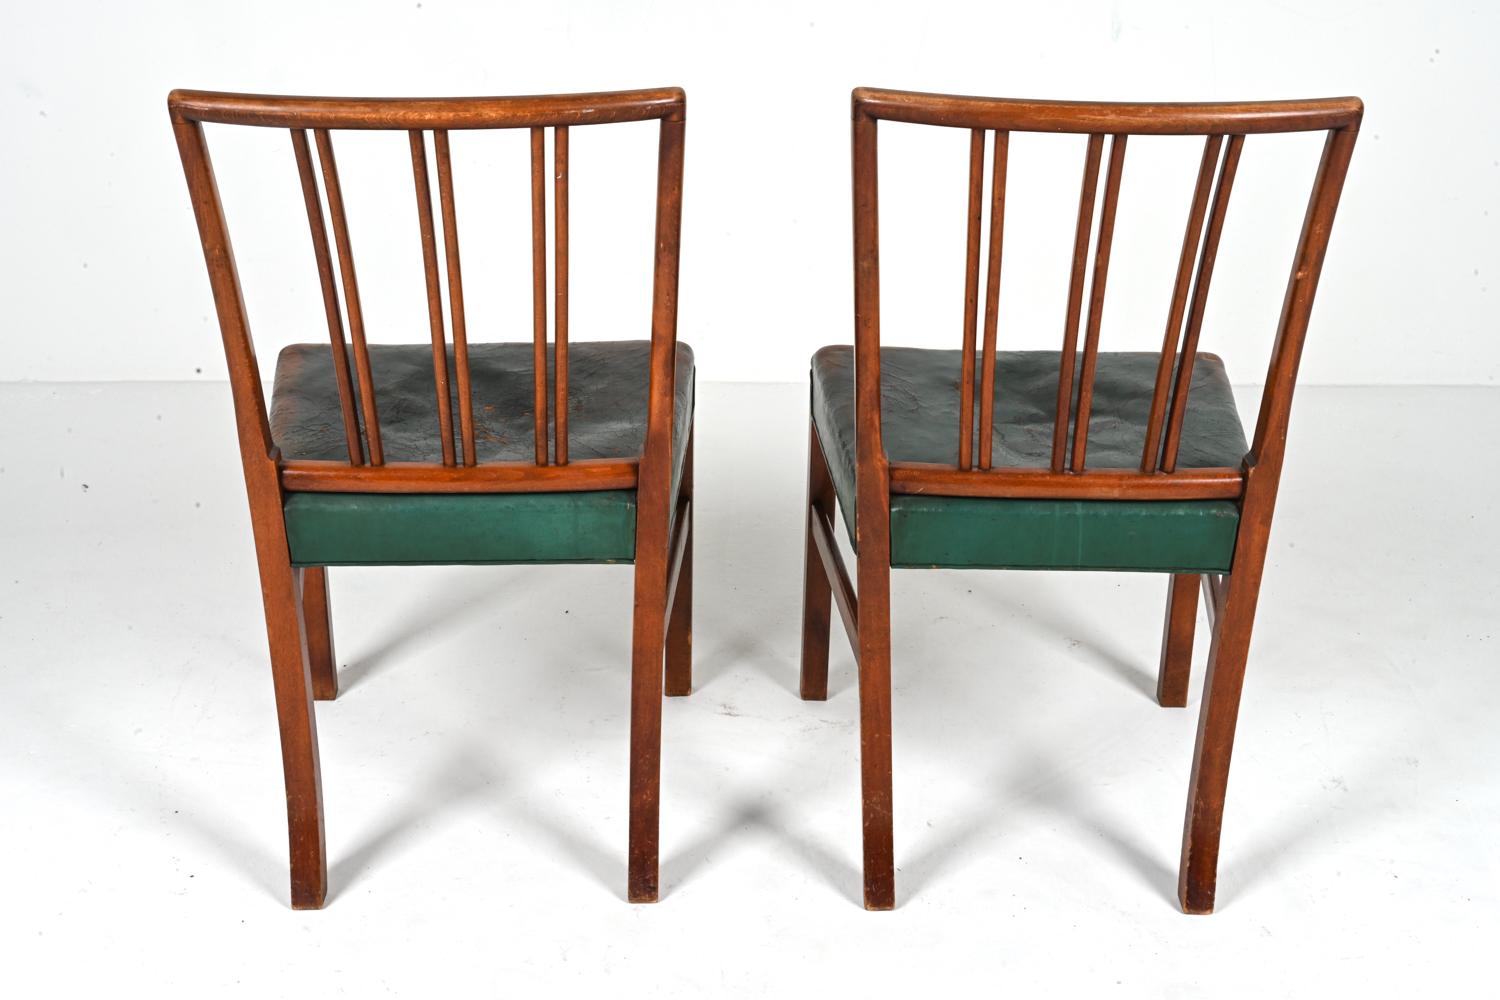 '12' Rare Model 1675B Dining Chairs by Ole Wanscher Fritz Hansen, c. 1940's For Sale 9